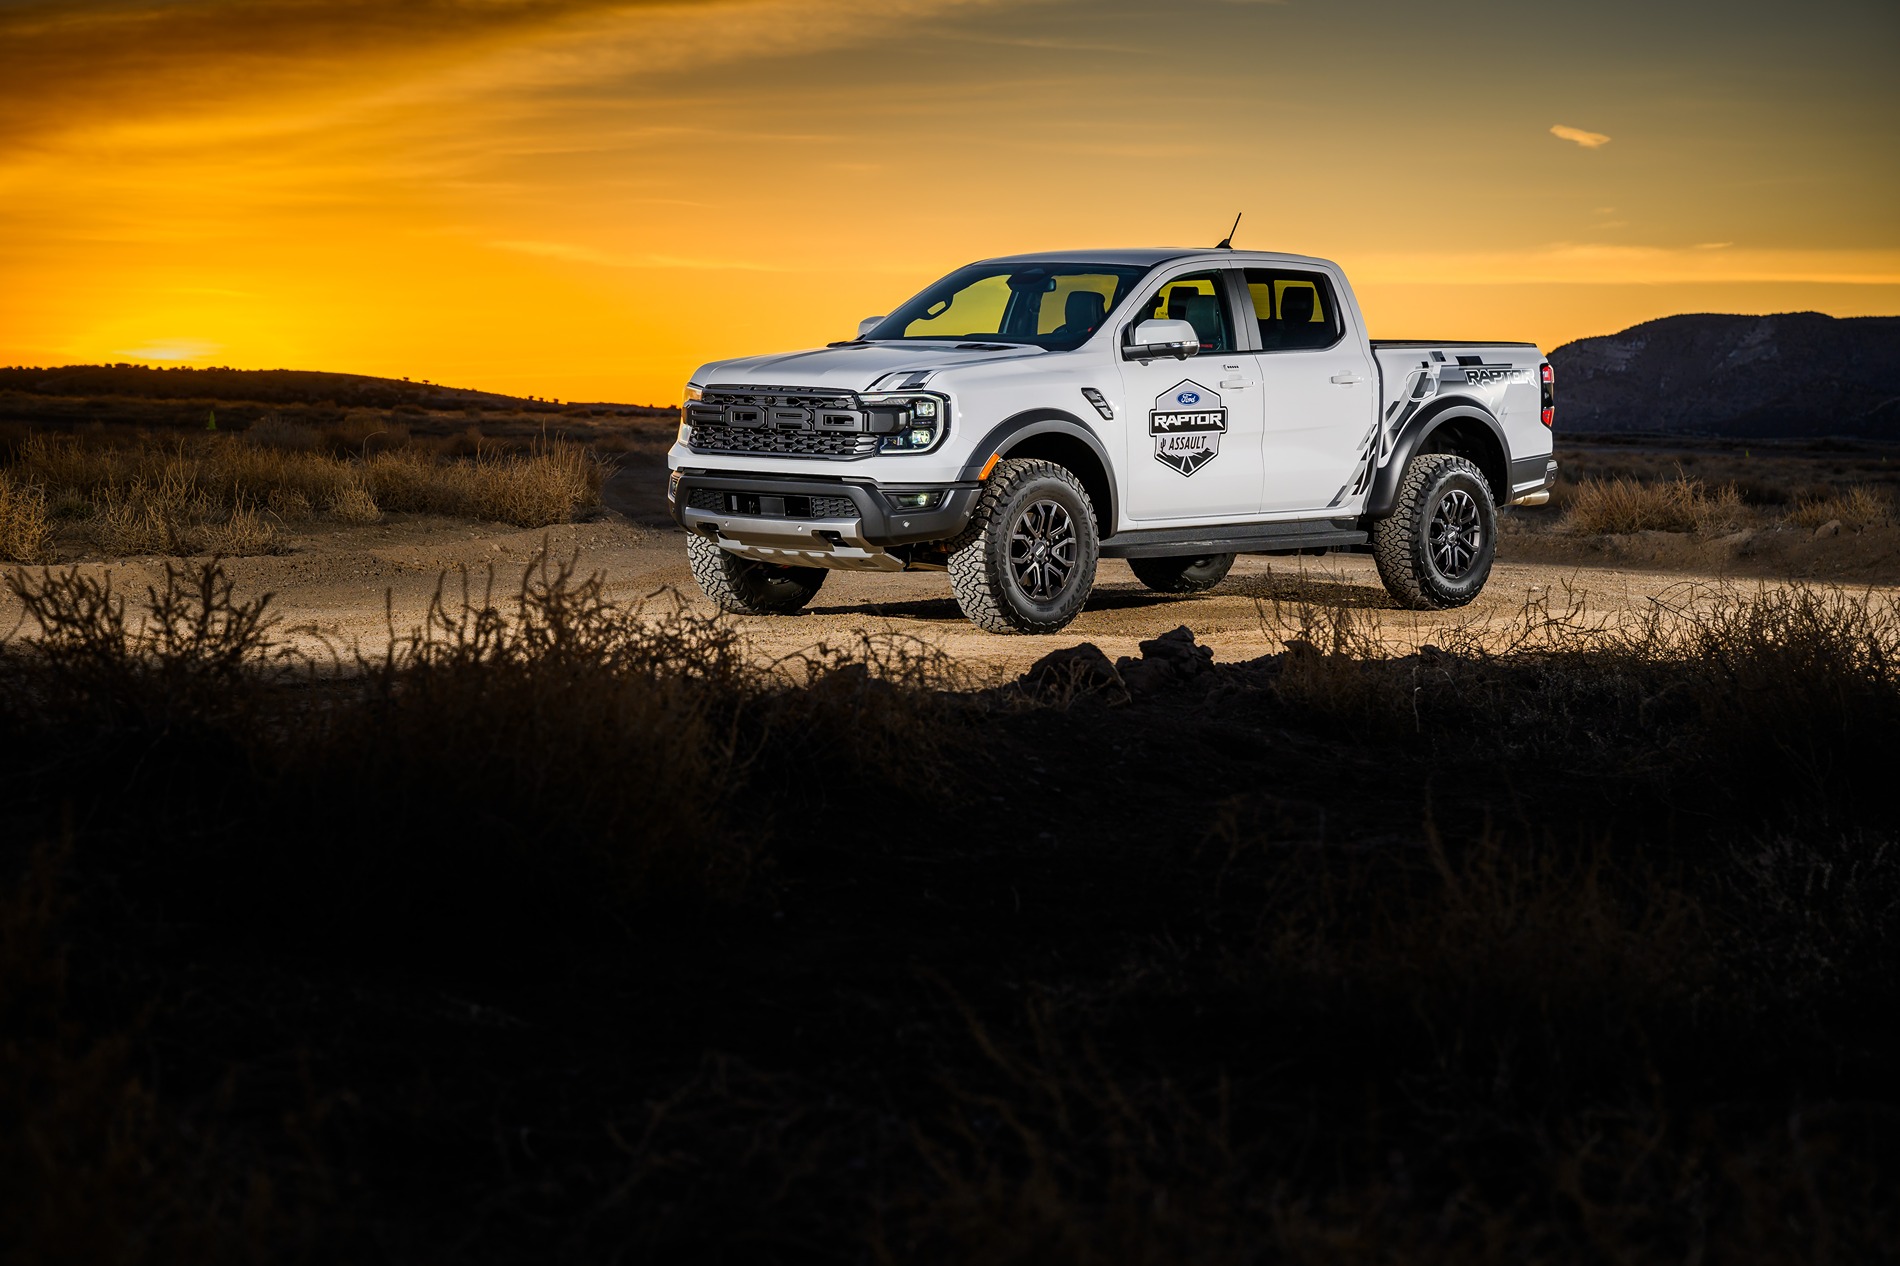 Ford Ranger Ranger Raptor Assault School Announced Exclusively (& Free) for Owners Ford Performance Racing School_Raptor Assault 14